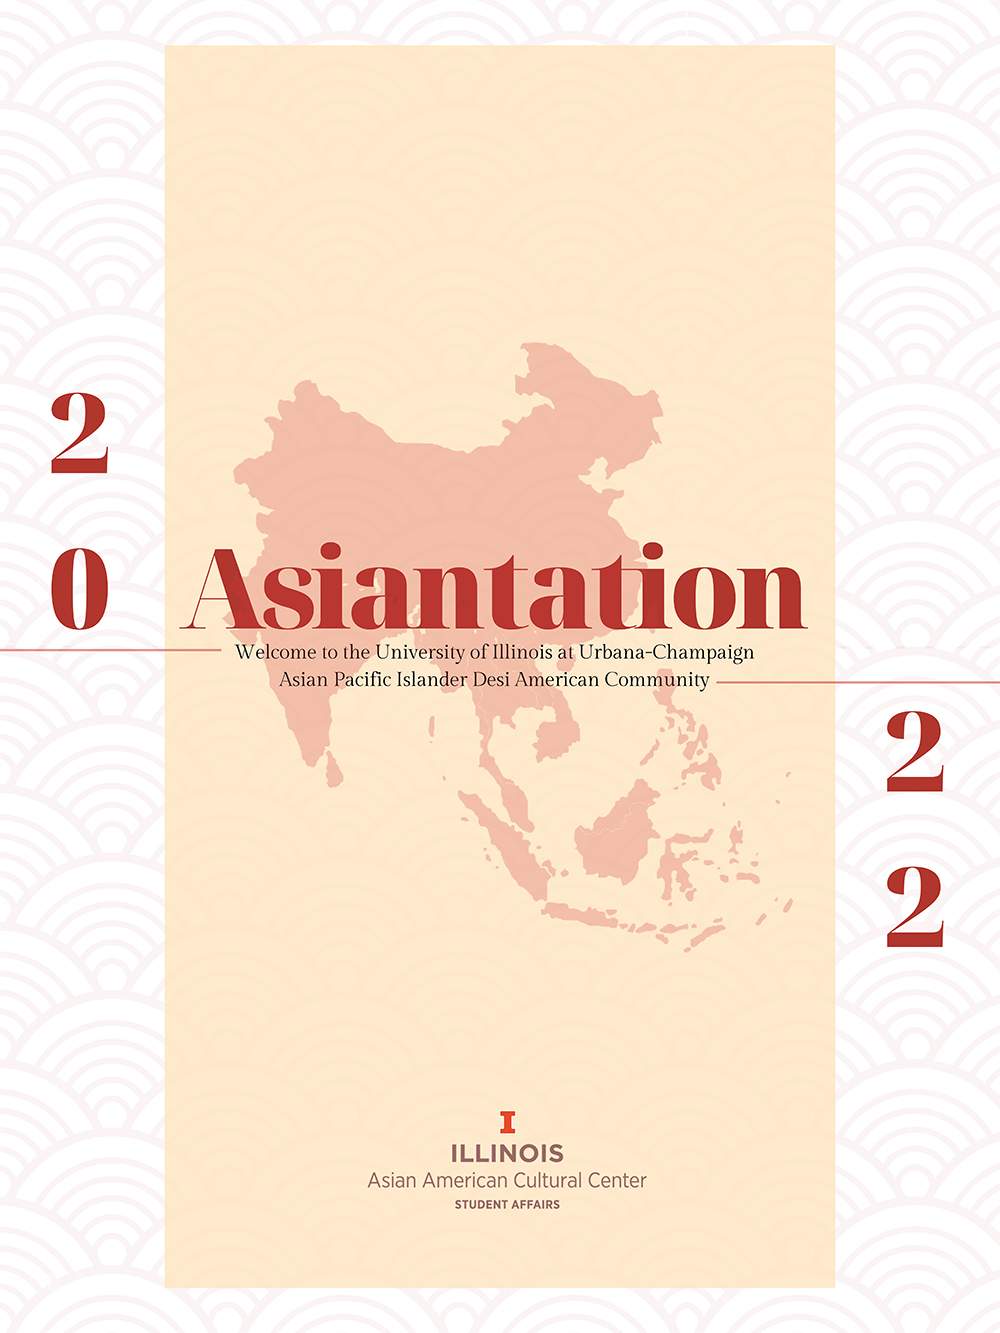 2022 Asiantation guide cover featuring Asia continent shape in background and stylized text